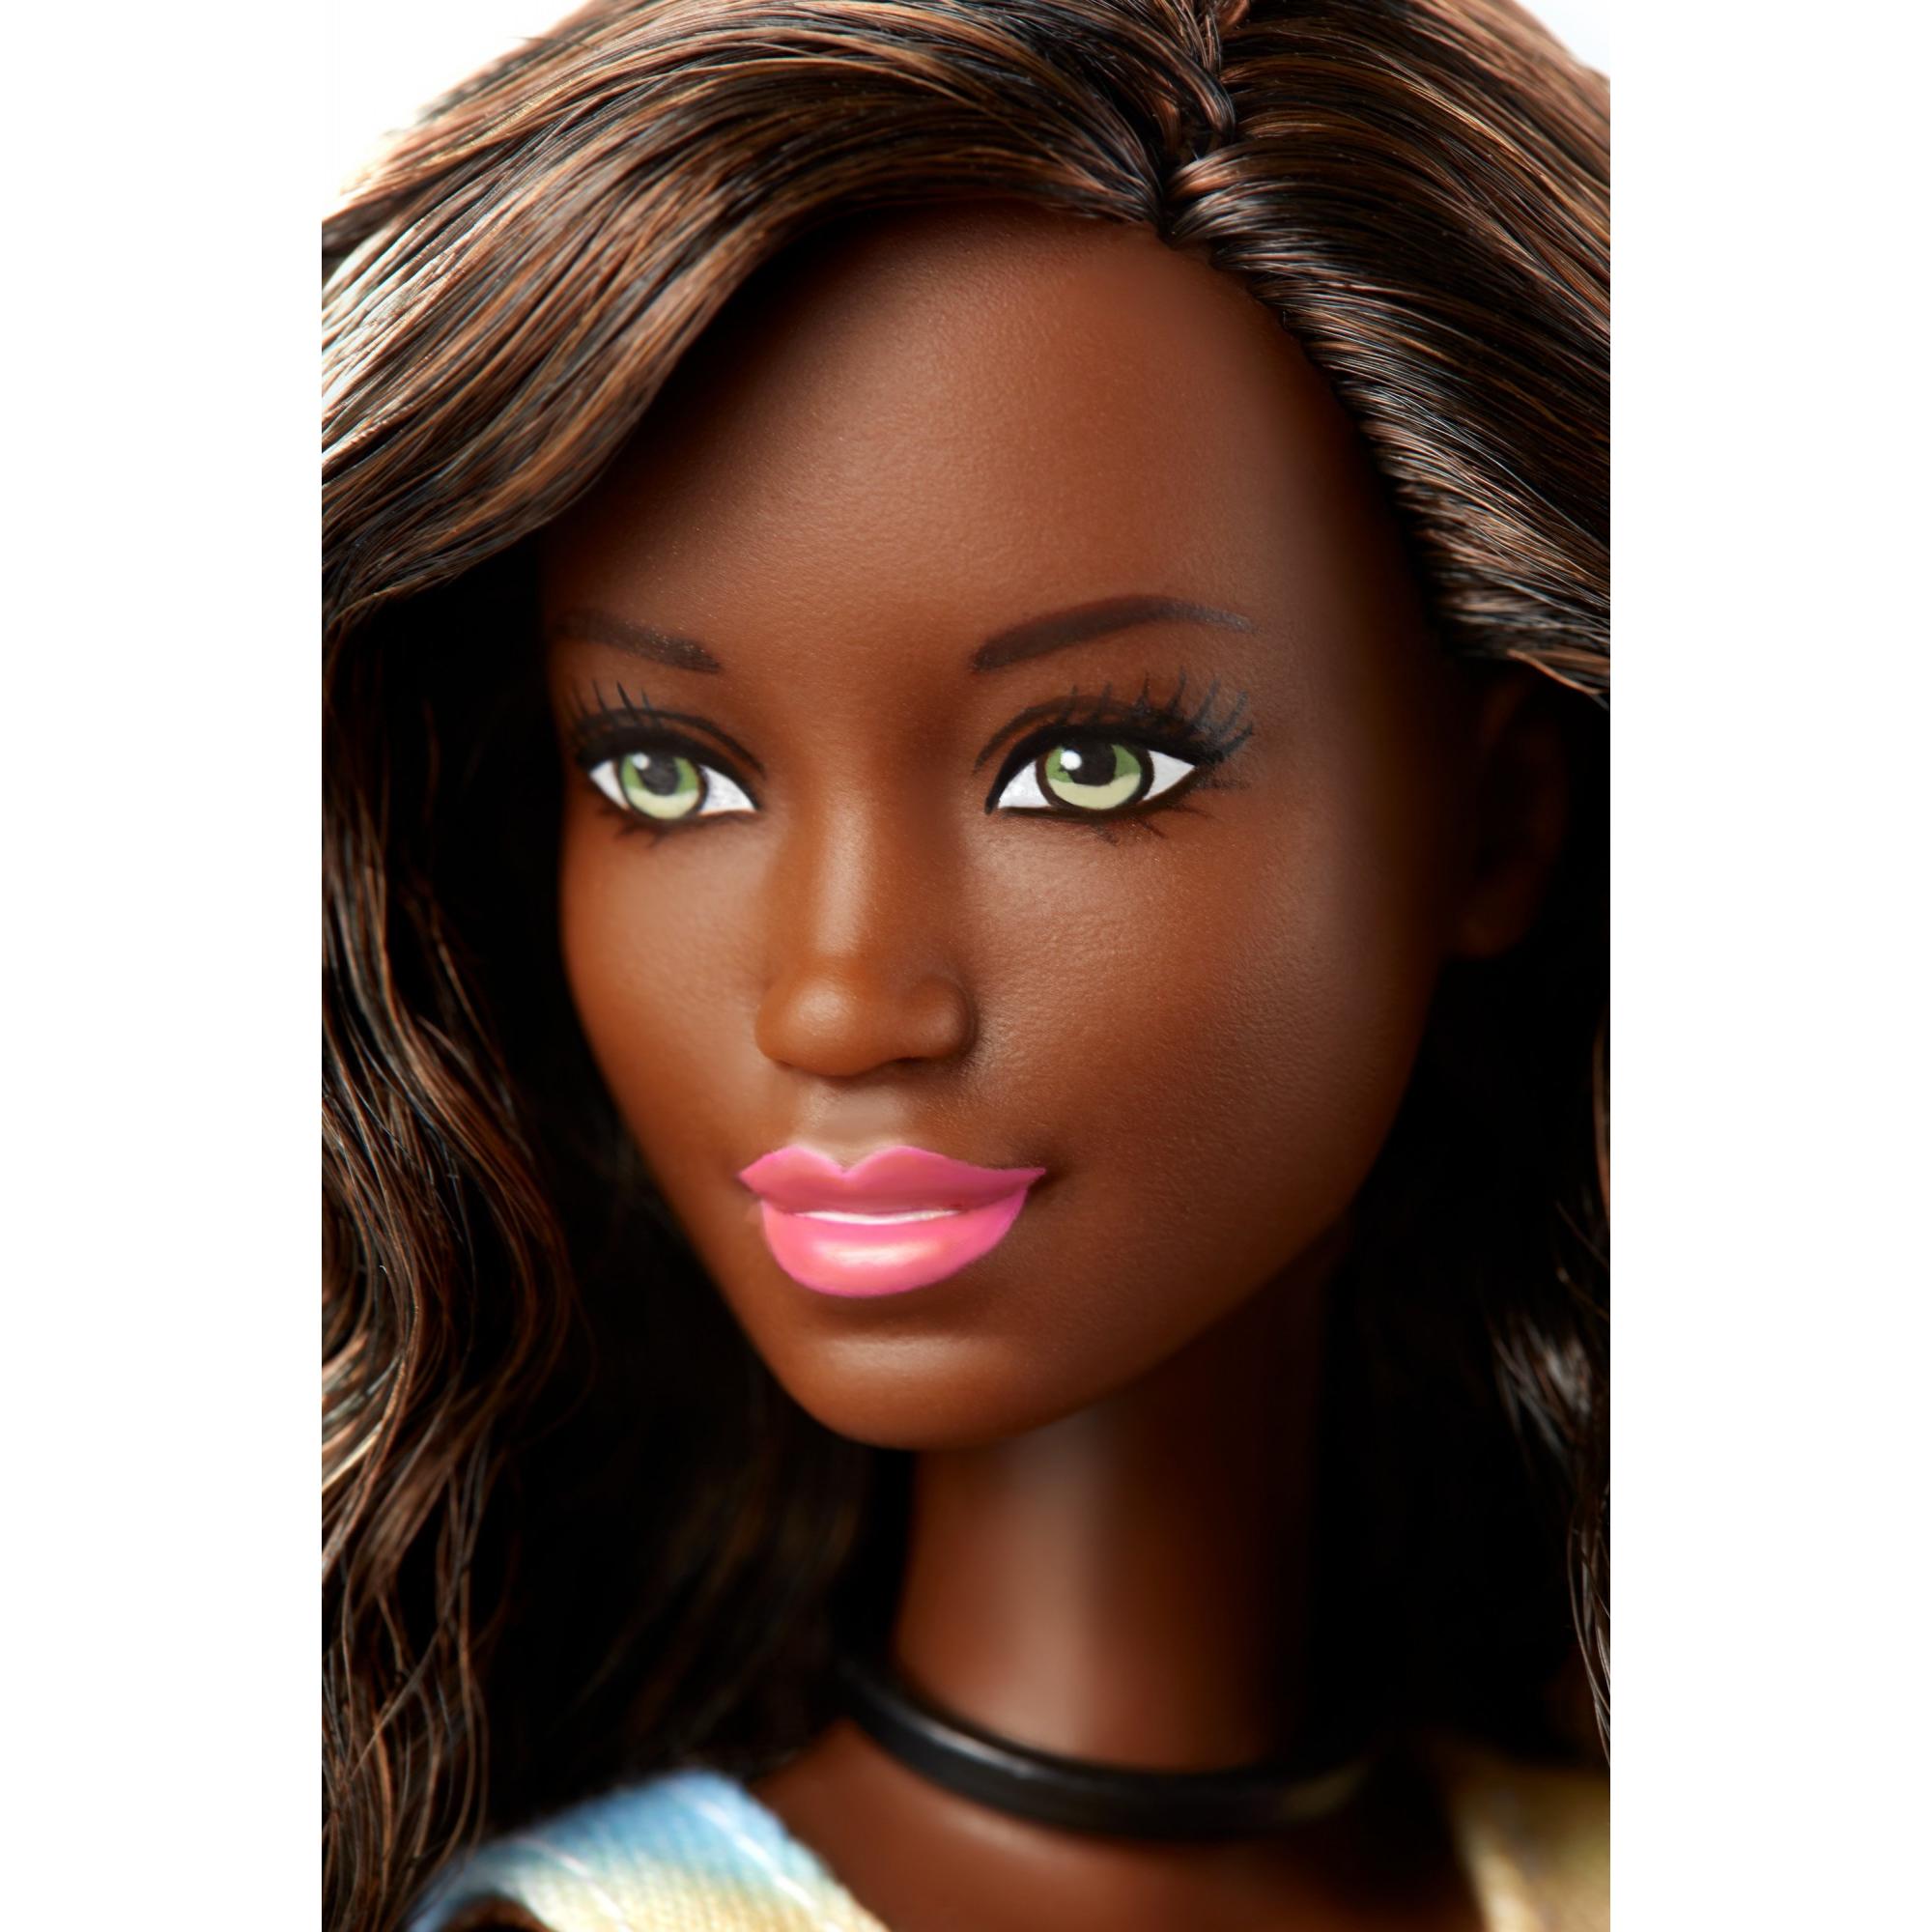 Barbie Doll With 2 Surprise Career Looks Featuring 8 Surprises, Dark Hair - image 3 of 6